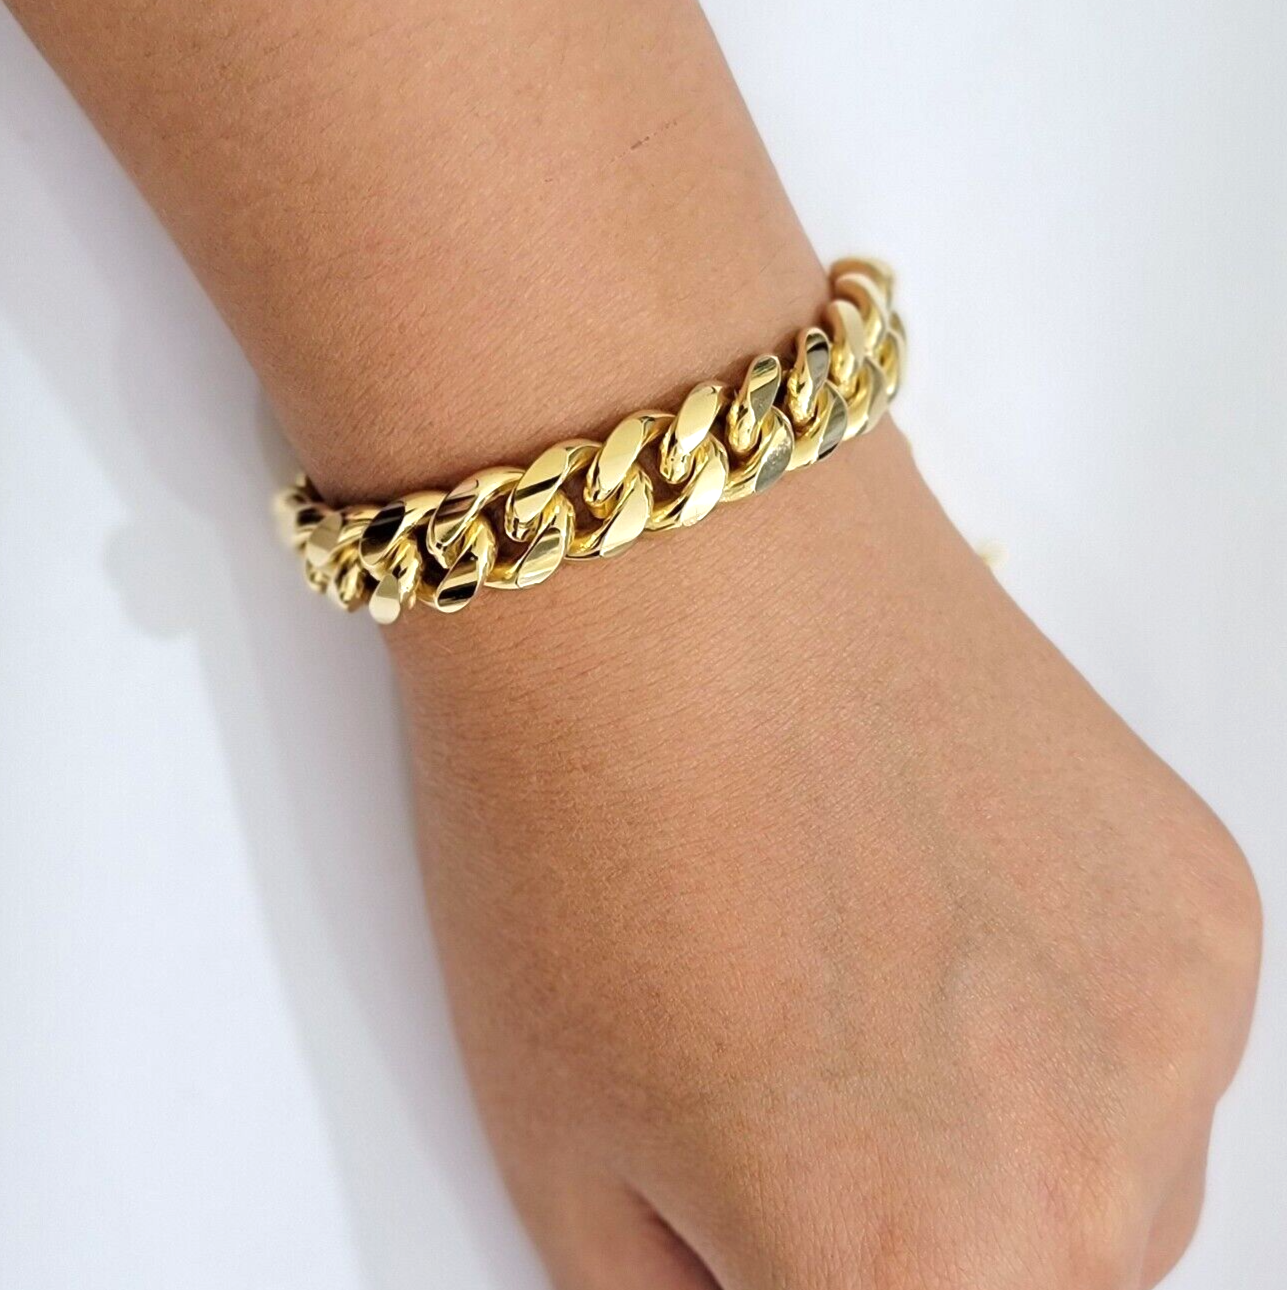 Solid 10k Gold Bracelet 12mm Miami Cuban Link 9 Inch Box Clasp Mens REAL 10KT